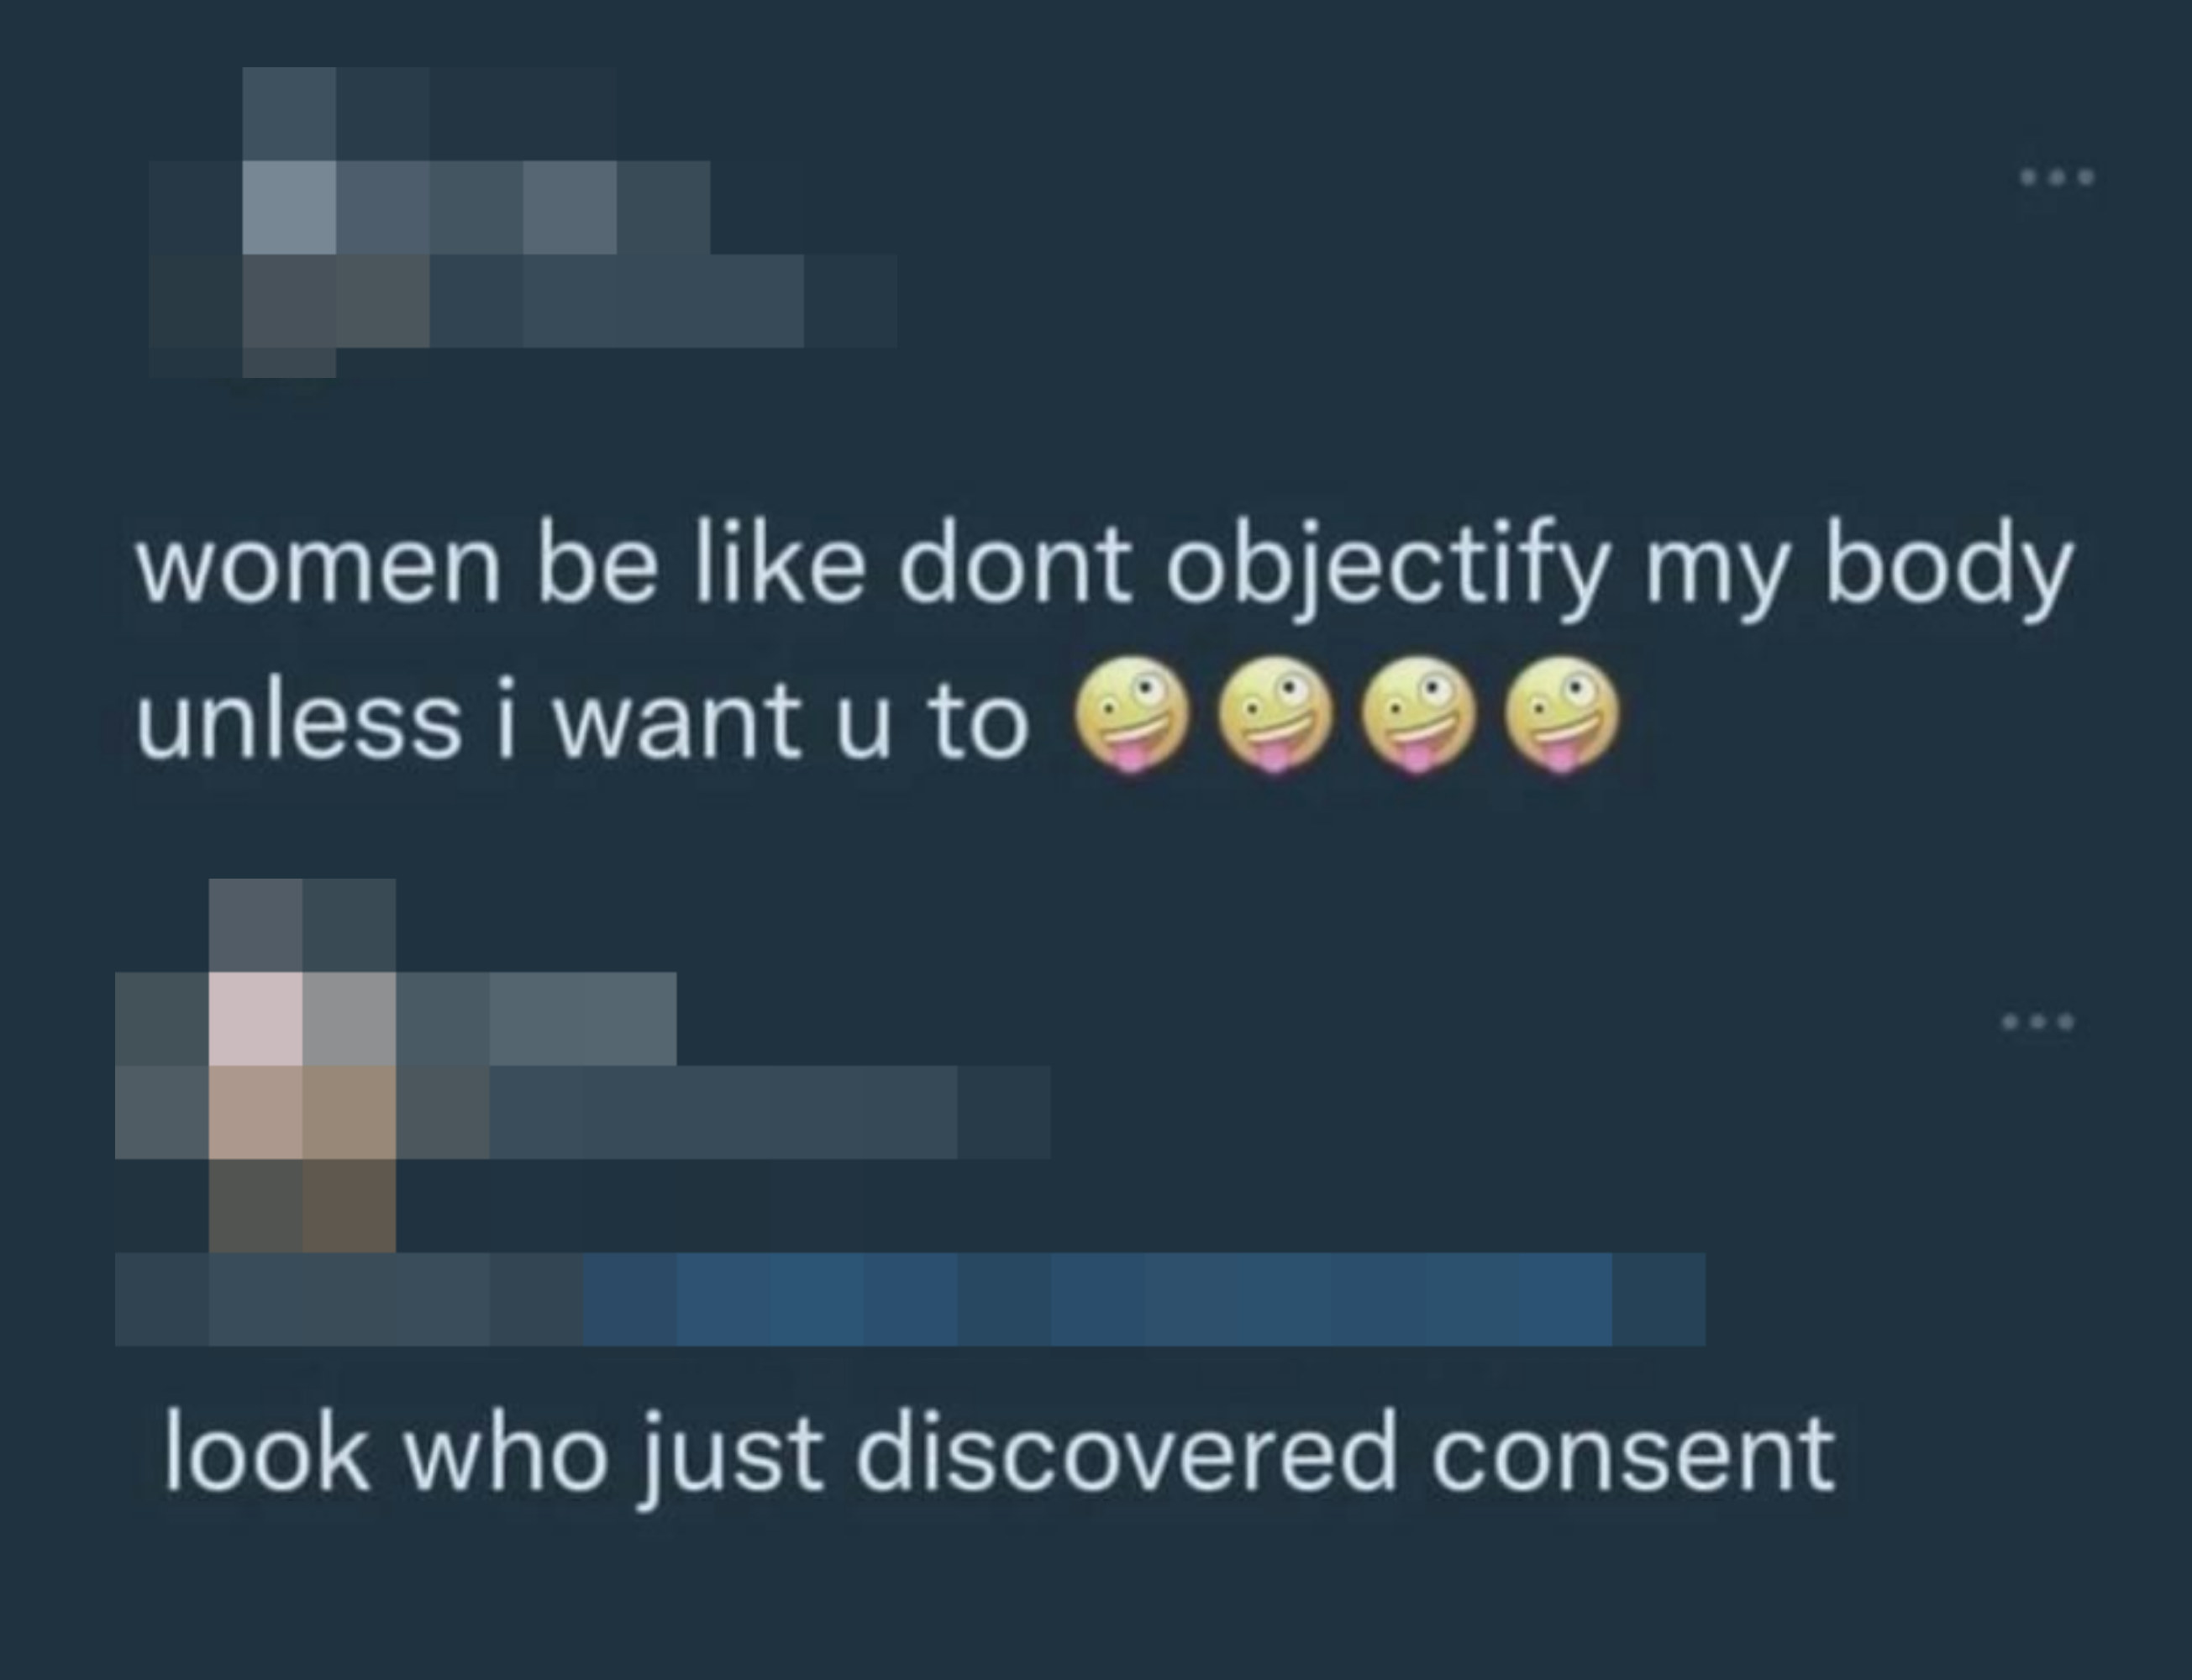 &quot;women be like don&#x27;t objectify my body unless i want you to&quot; and someone responds, look who just discovered consent